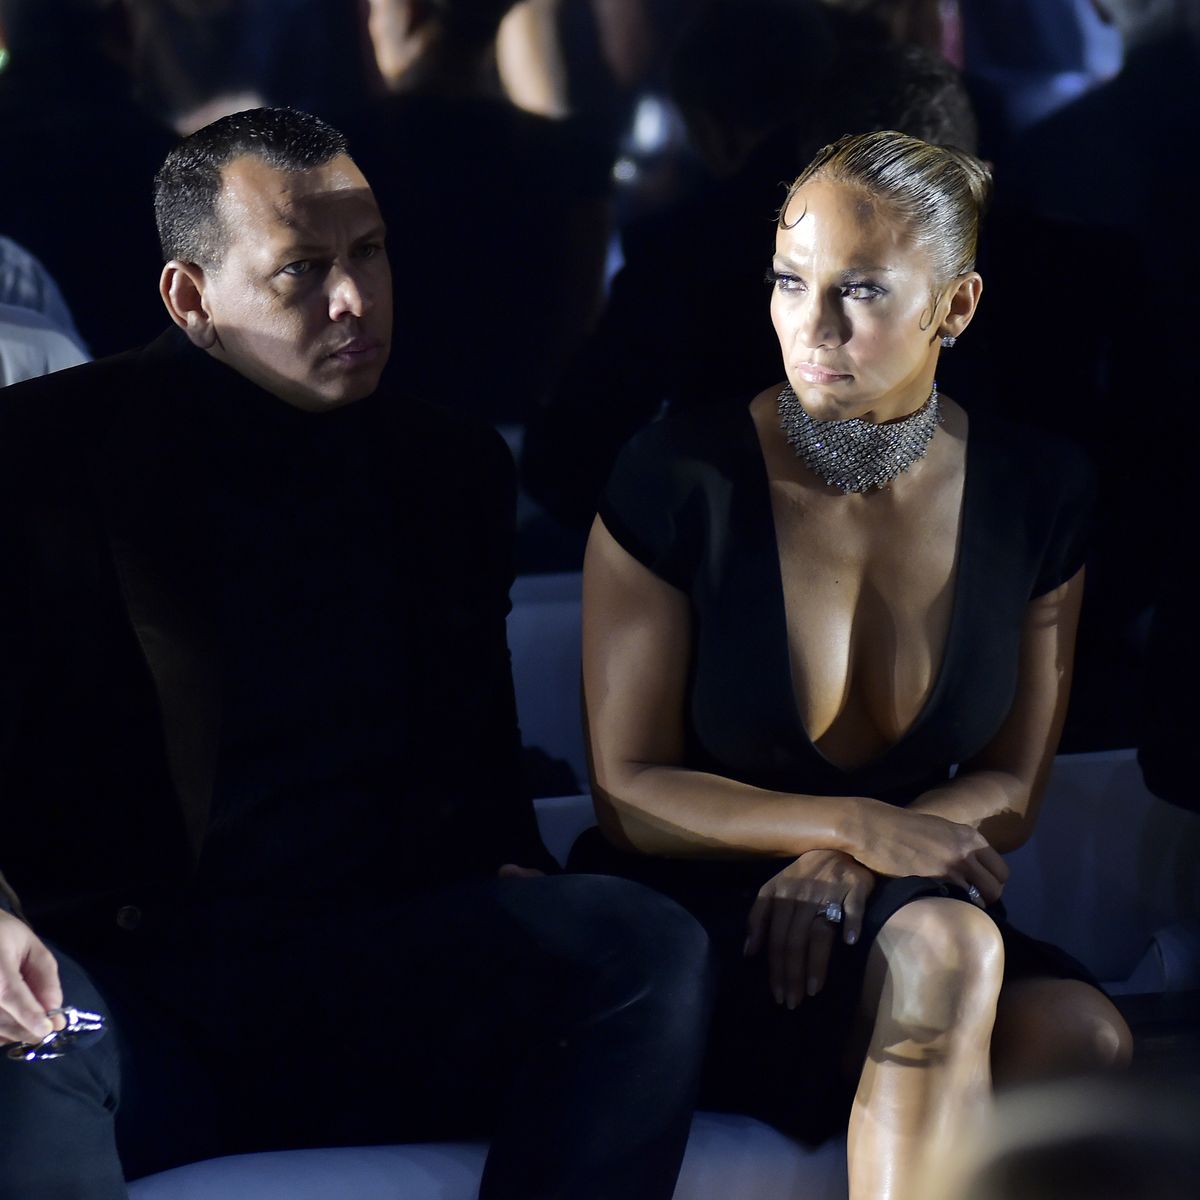 Jennifer Lopez Wore This Elegant Look at the Tom Ford Show